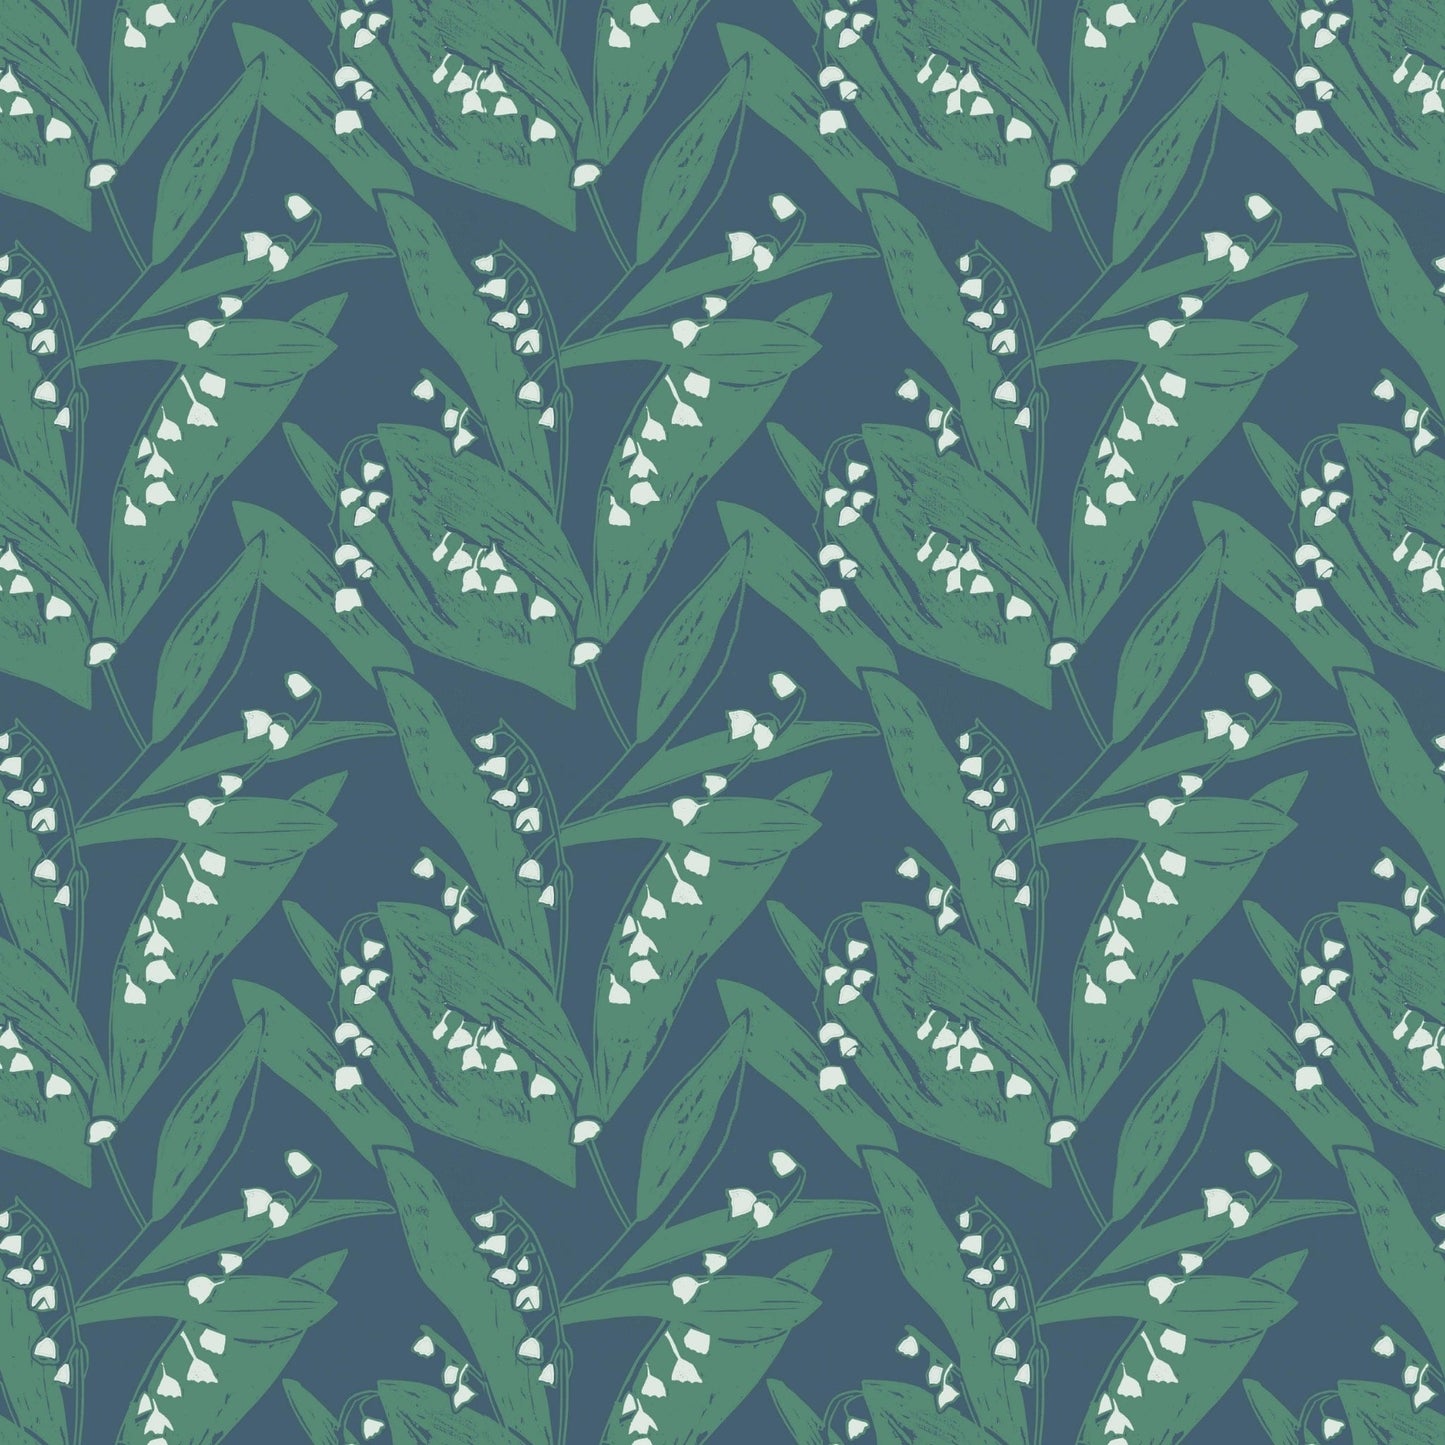 WALLPAPER SAMPLE Leaves at Midnight SAMPLE Lily of the Valley - Leaves at Midnight